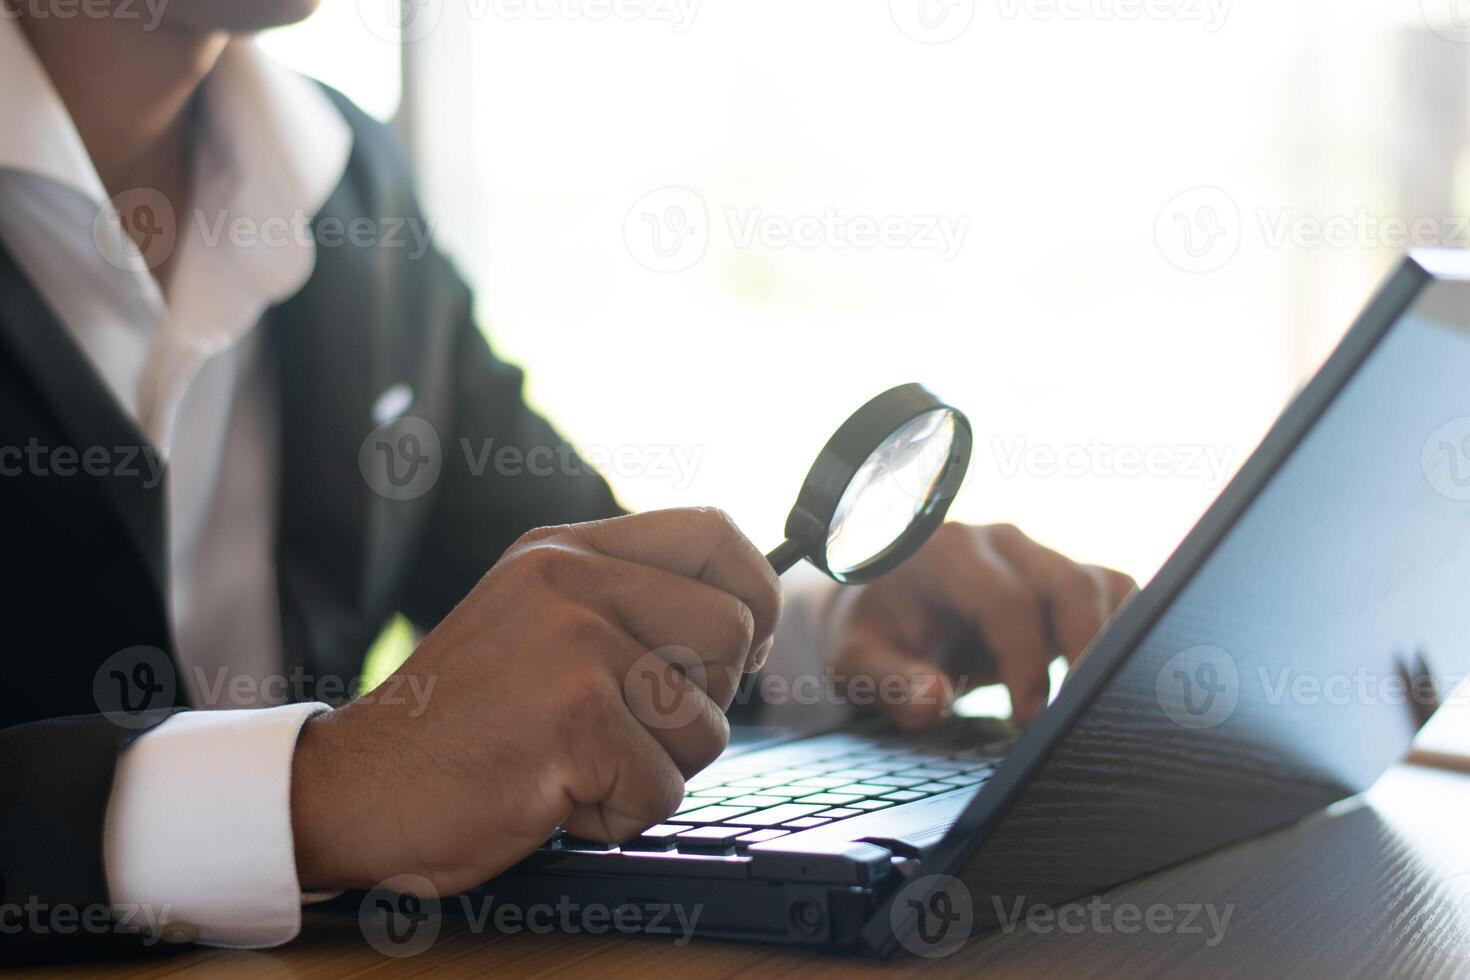 Businessmen or accountants work on computers and use magnifying glasses to view business documents on their desks. photo